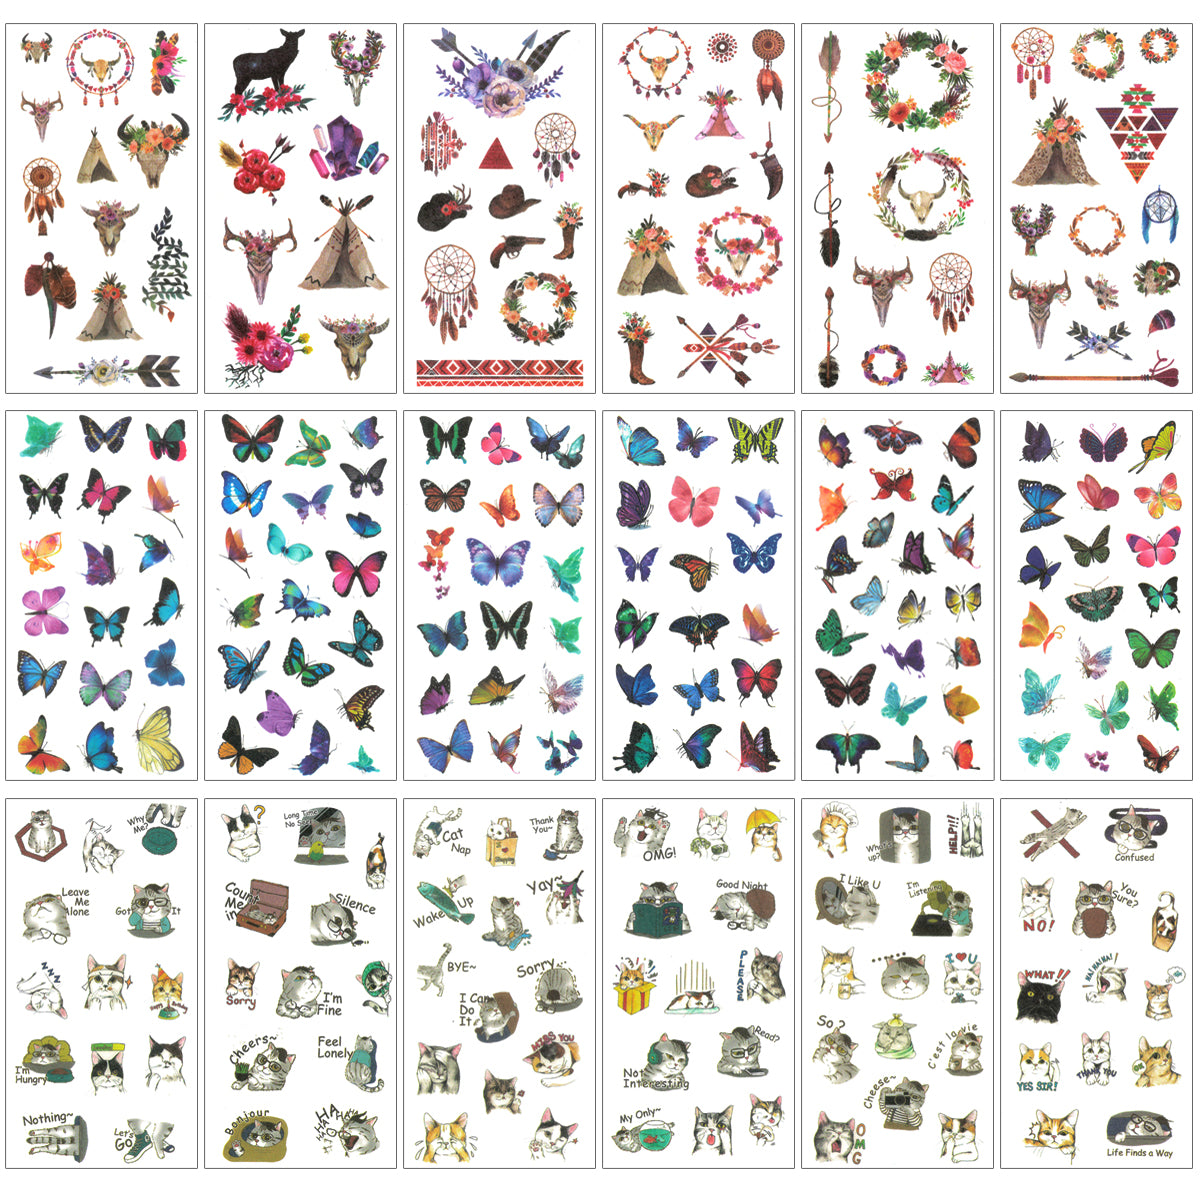 Wrapables Washi Stickers Sets for Scrapbooking, DIY Crafts for Stationery, Diary, Card Making